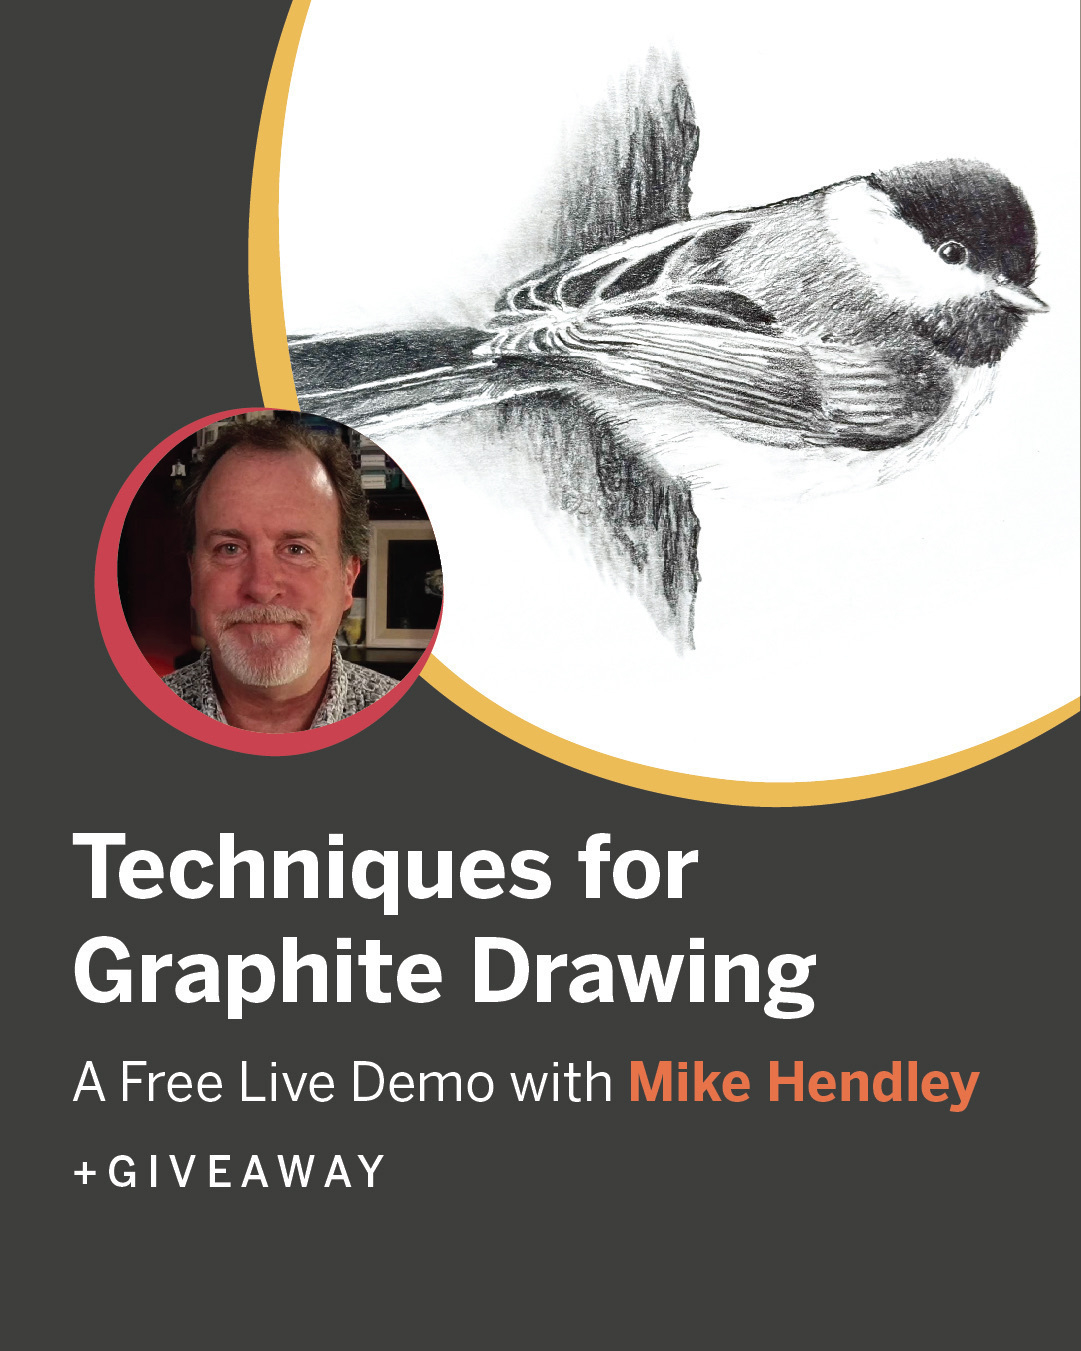 A drawing of a chickadee with a photo of the artist, Mike Hendley promoting his live demo on March 16th.